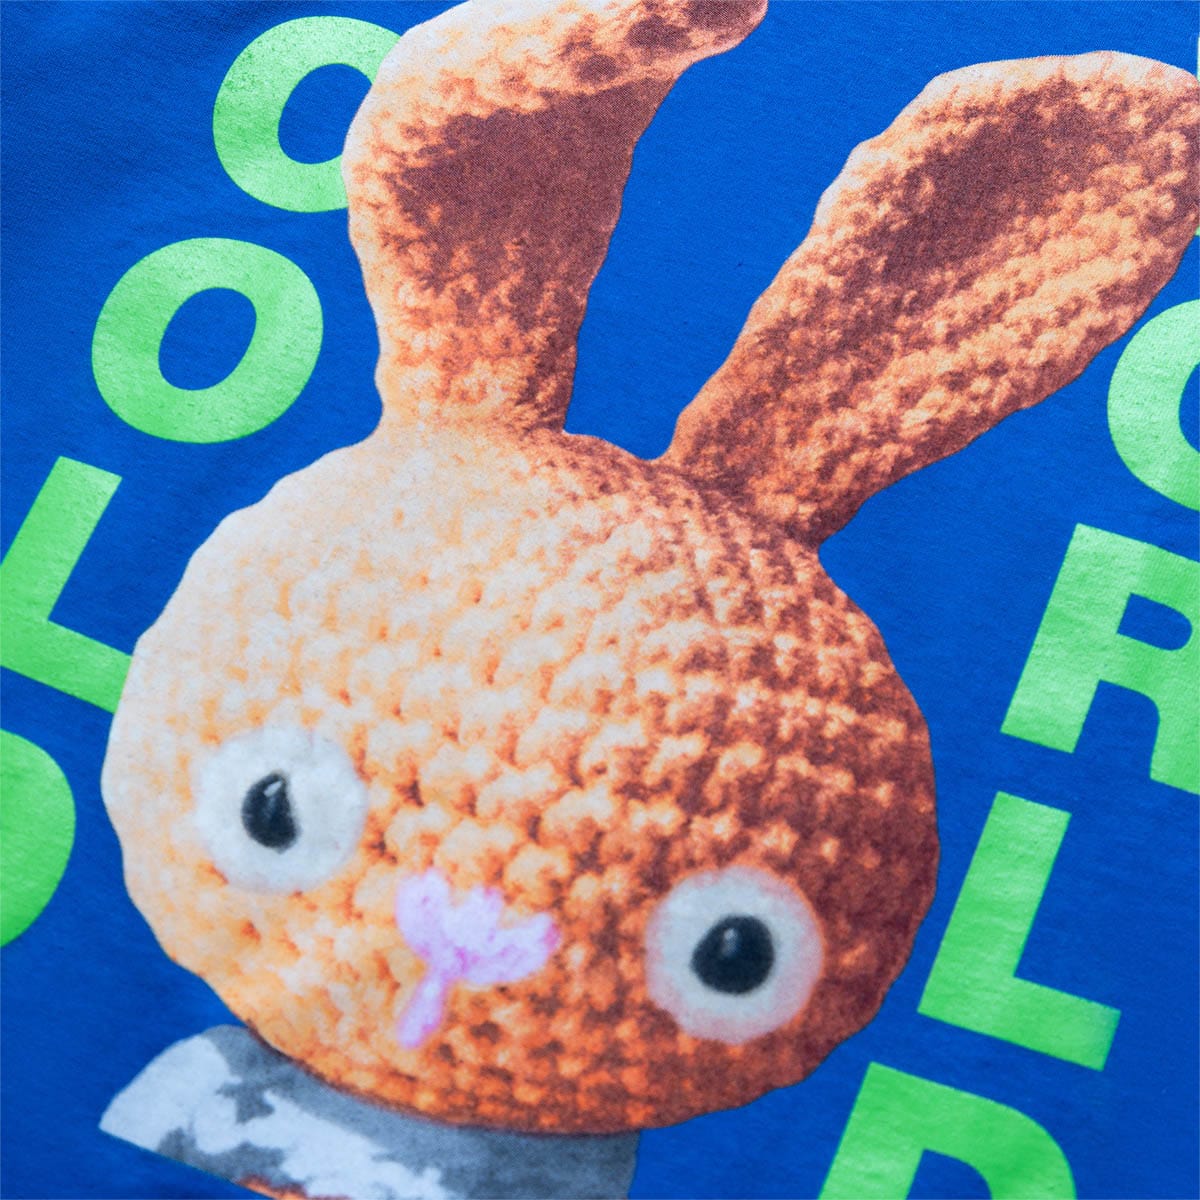 Cold World Frozen Goods T-Shirts DIRTY BUNNY TEE